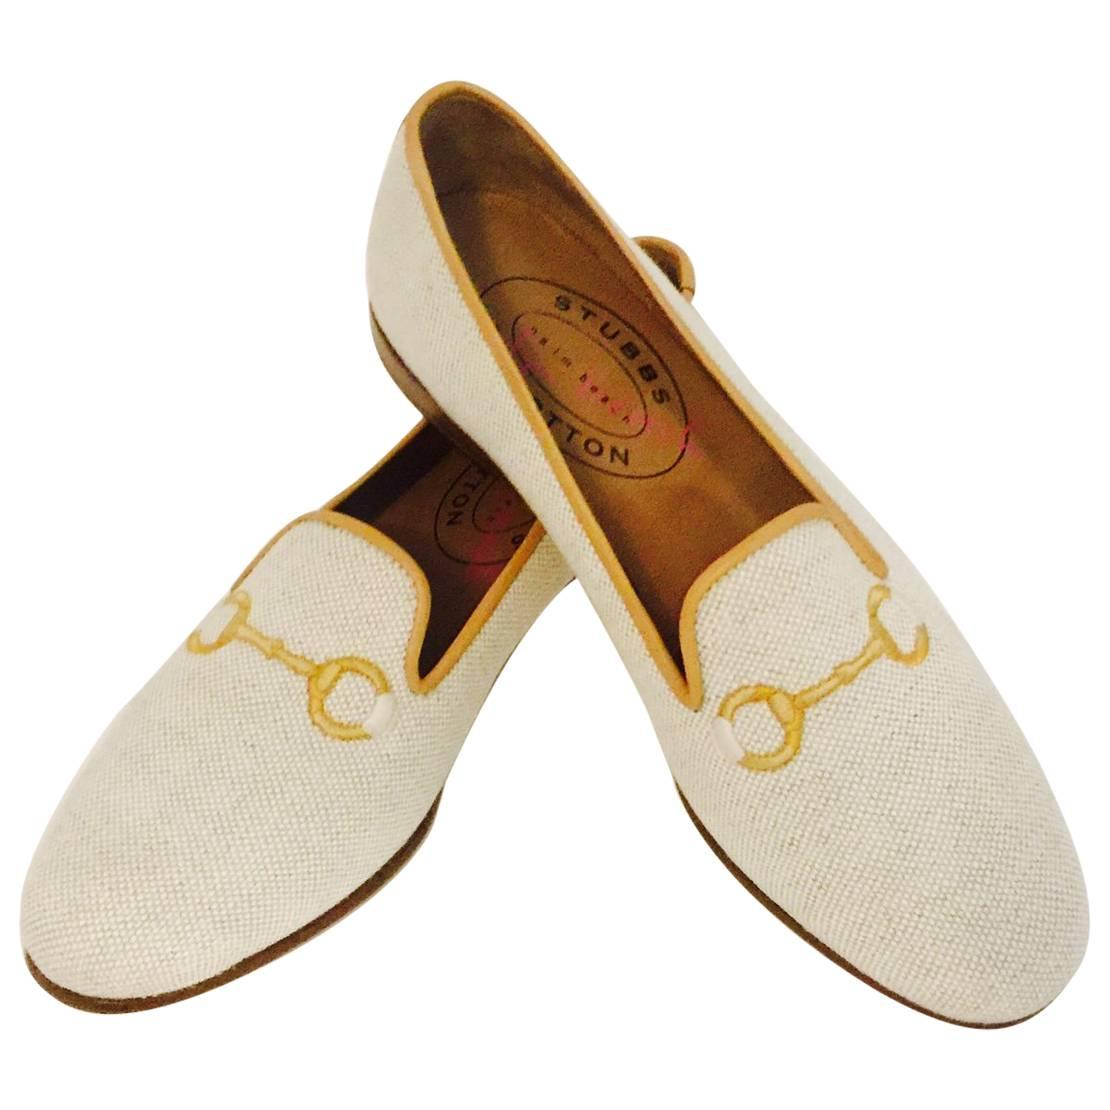 Stubbs & Wootton Palm Beach Canvas Slippers With Horsebit Embroidery 